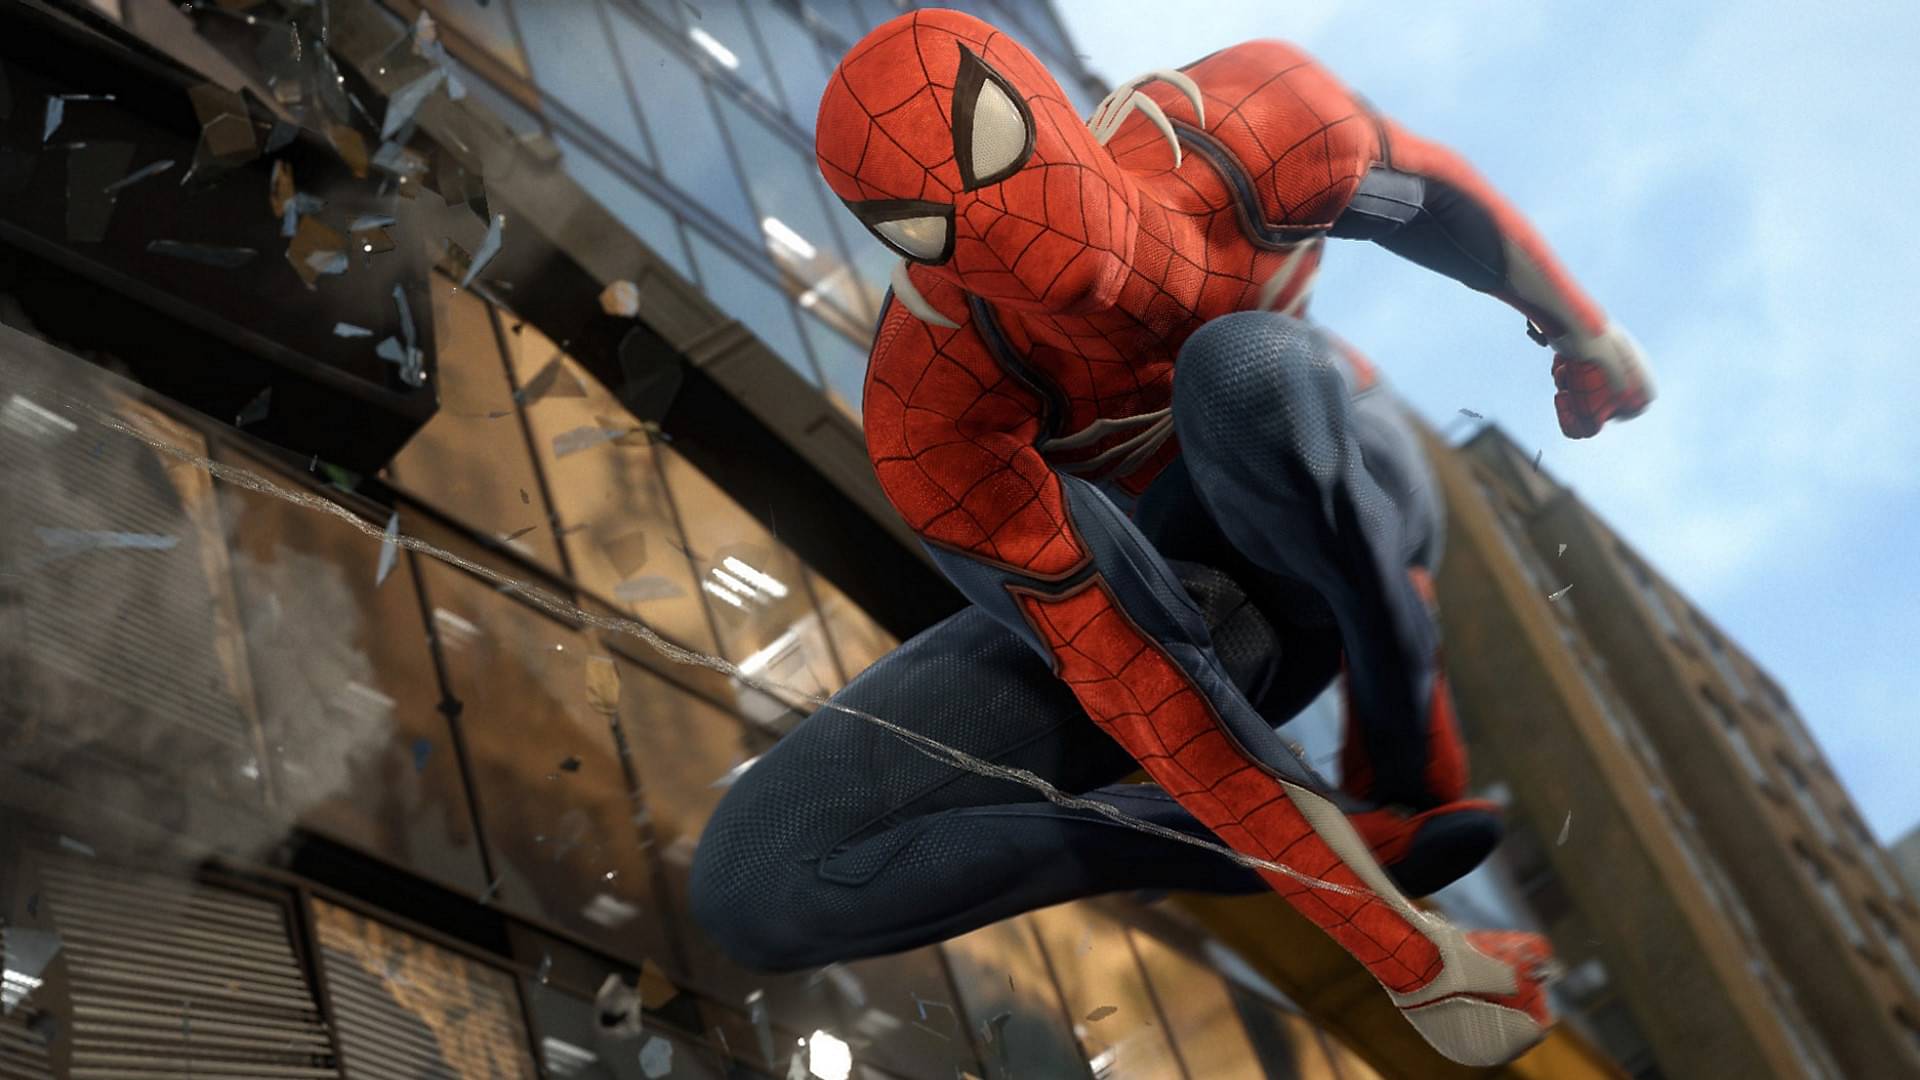 An image of Spider-Man swinging